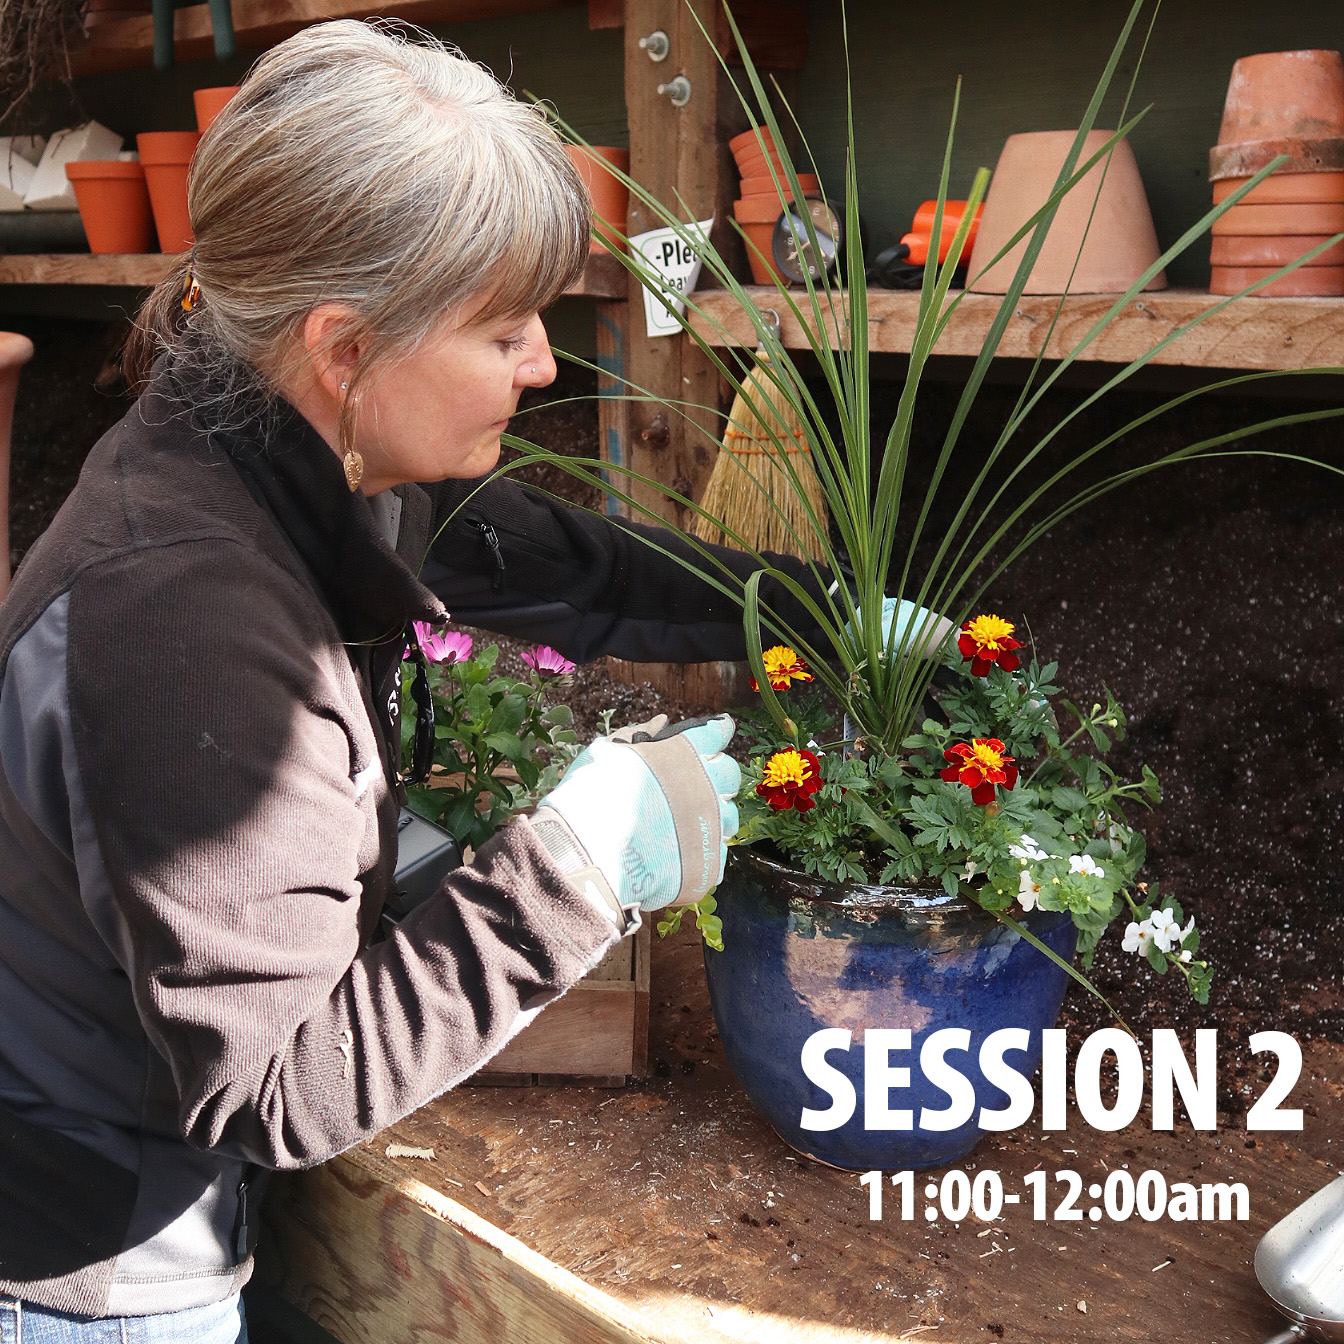 Planting Day- Session 2 11am